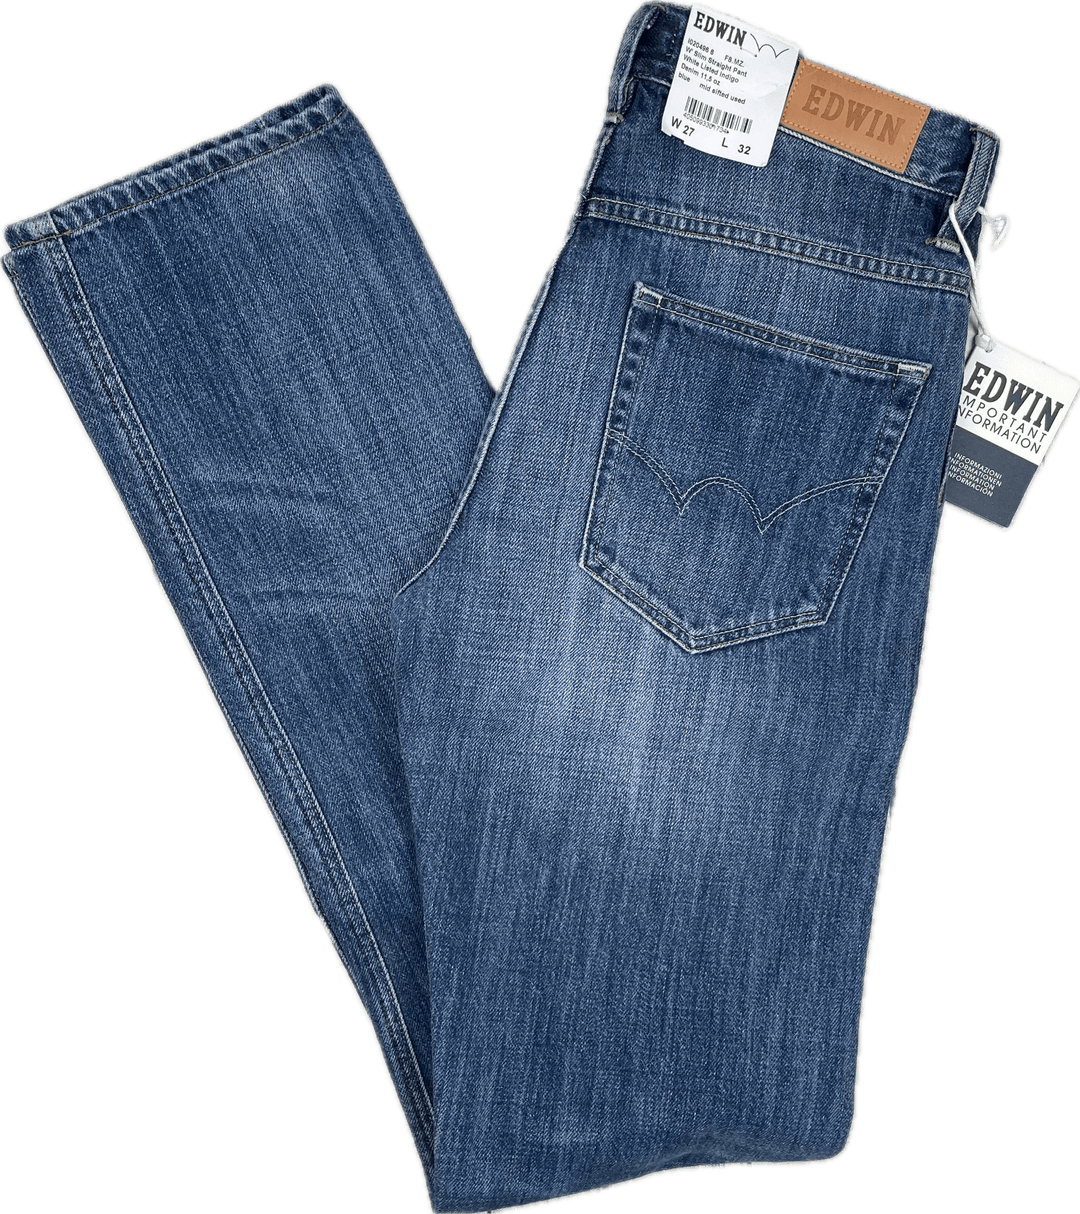 NWT- Edwin Made in Japan 'Slim Straight' High Rise Jeans -Size 27/32 - Jean Pool